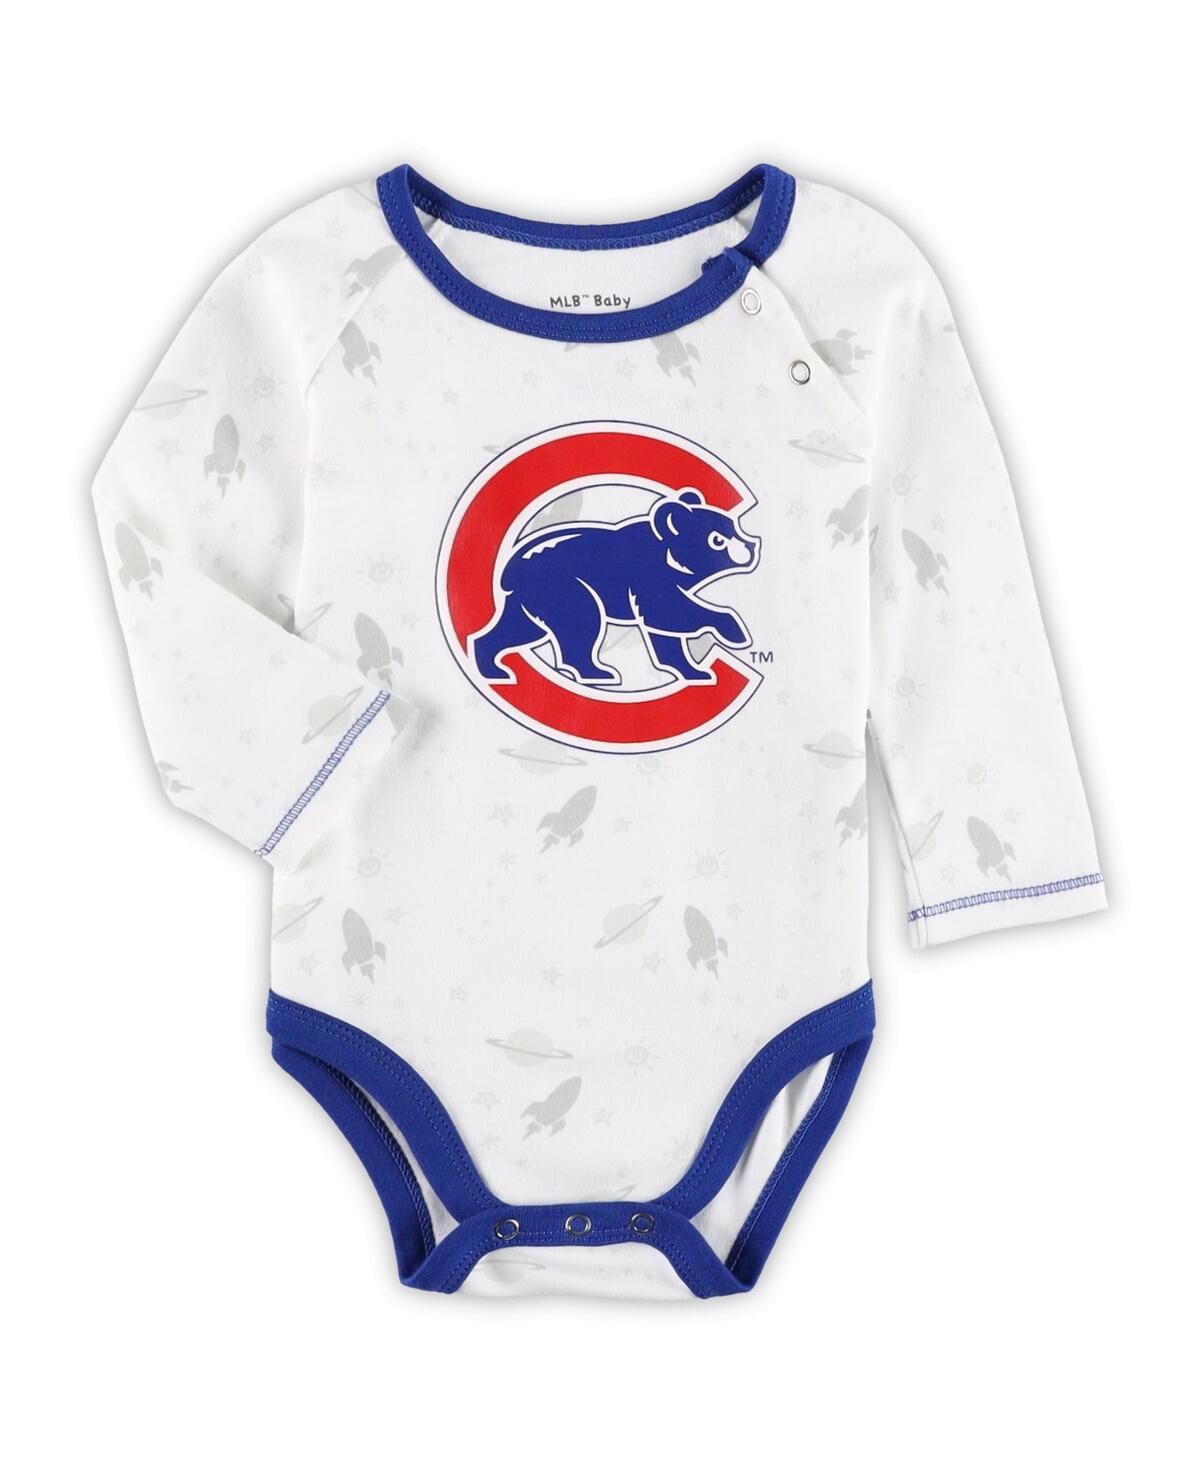 Shop Outerstuff Newborn And Infant Boys And Girls Royal, White Chicago Cubs Dream Team Bodysuit Hat And Footed Pants In Royal,white